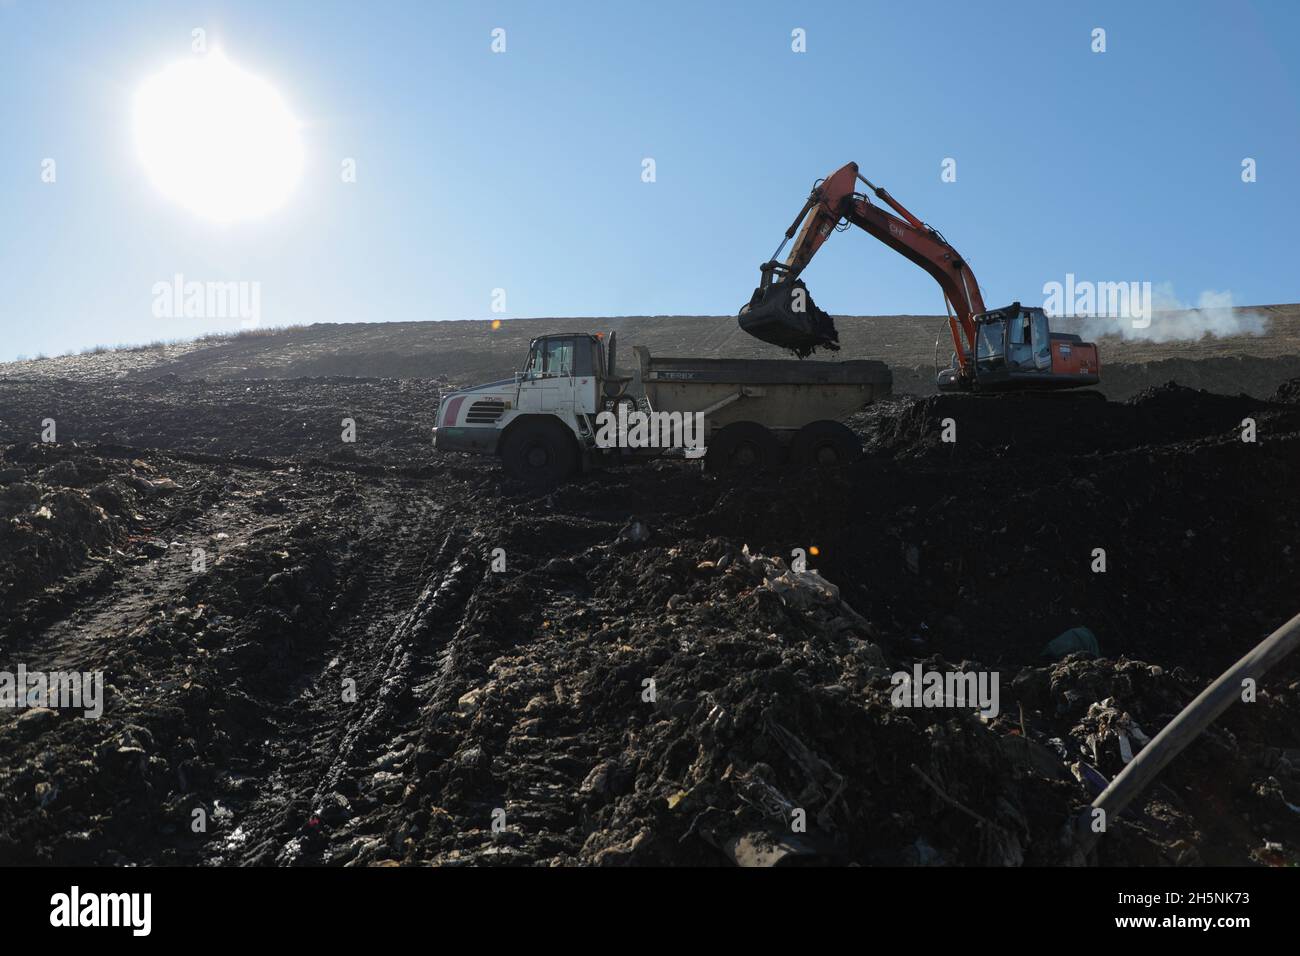 An excavator seen at the Hrybovytchi landfill which is under reclamation (artificial restoration of soil fertility and vegetation after man-made disturbance of nature). The only legal place for garbage collection from Lviv and surrounding villages. It has been operating since 1958 close to the village of Velyki Hrybovychi. The landfill area is over 38 hectares. On May 28, 2016, a large fire broke out on the territory of the Hrybovytsia landfill causing a collapse of solid waste where three rescuers died under the rubble. (Photo by Mykola Tys/SOPA Images/Sipa USA) Stock Photo